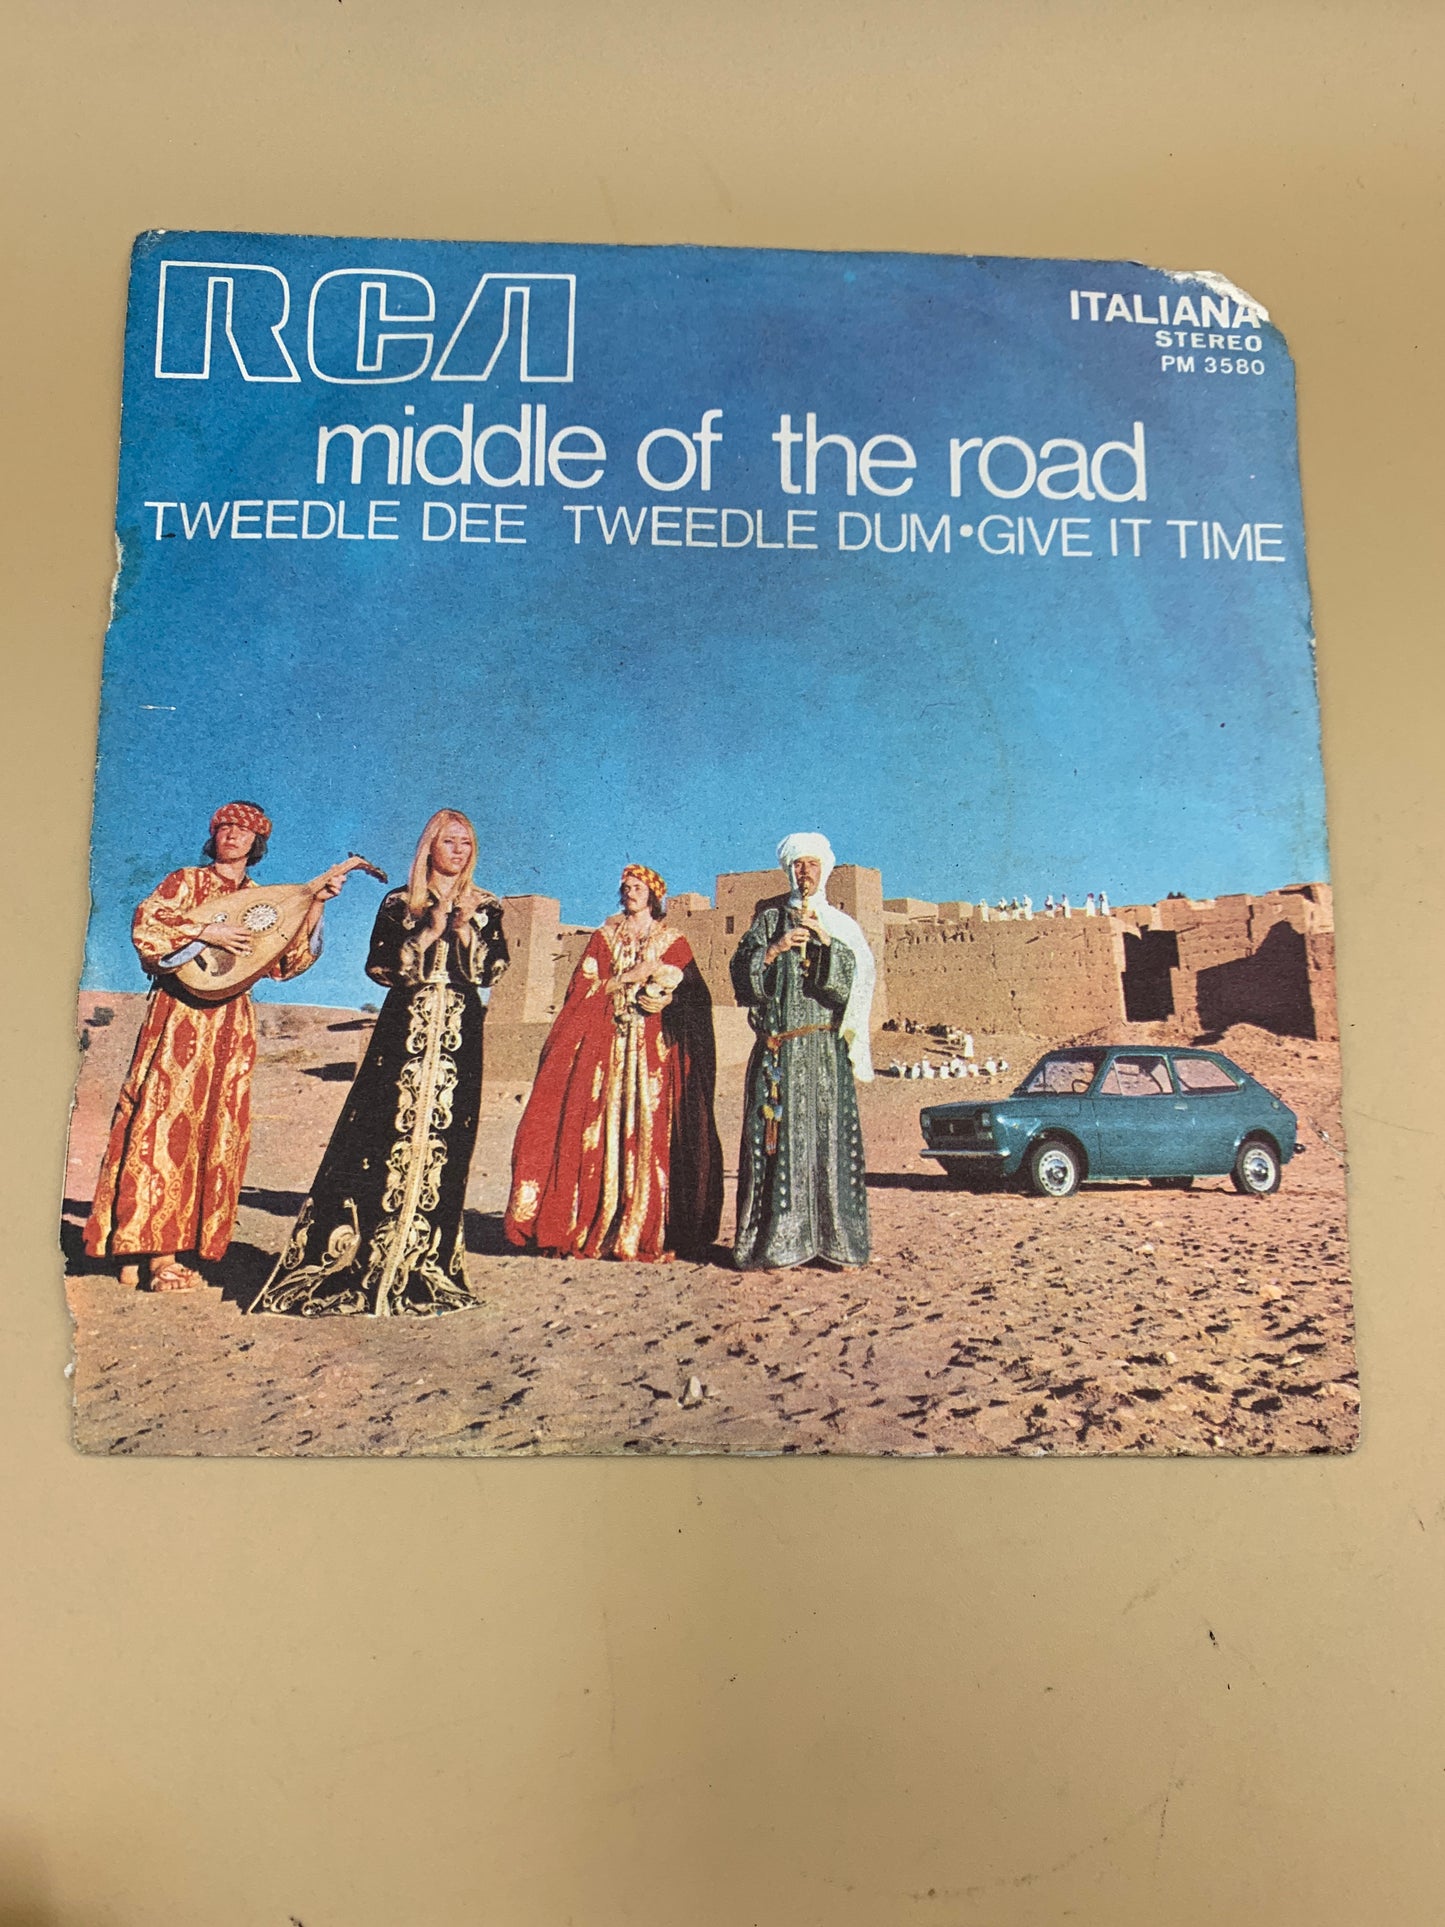 Middle of the road - 45 rpm vinyl record